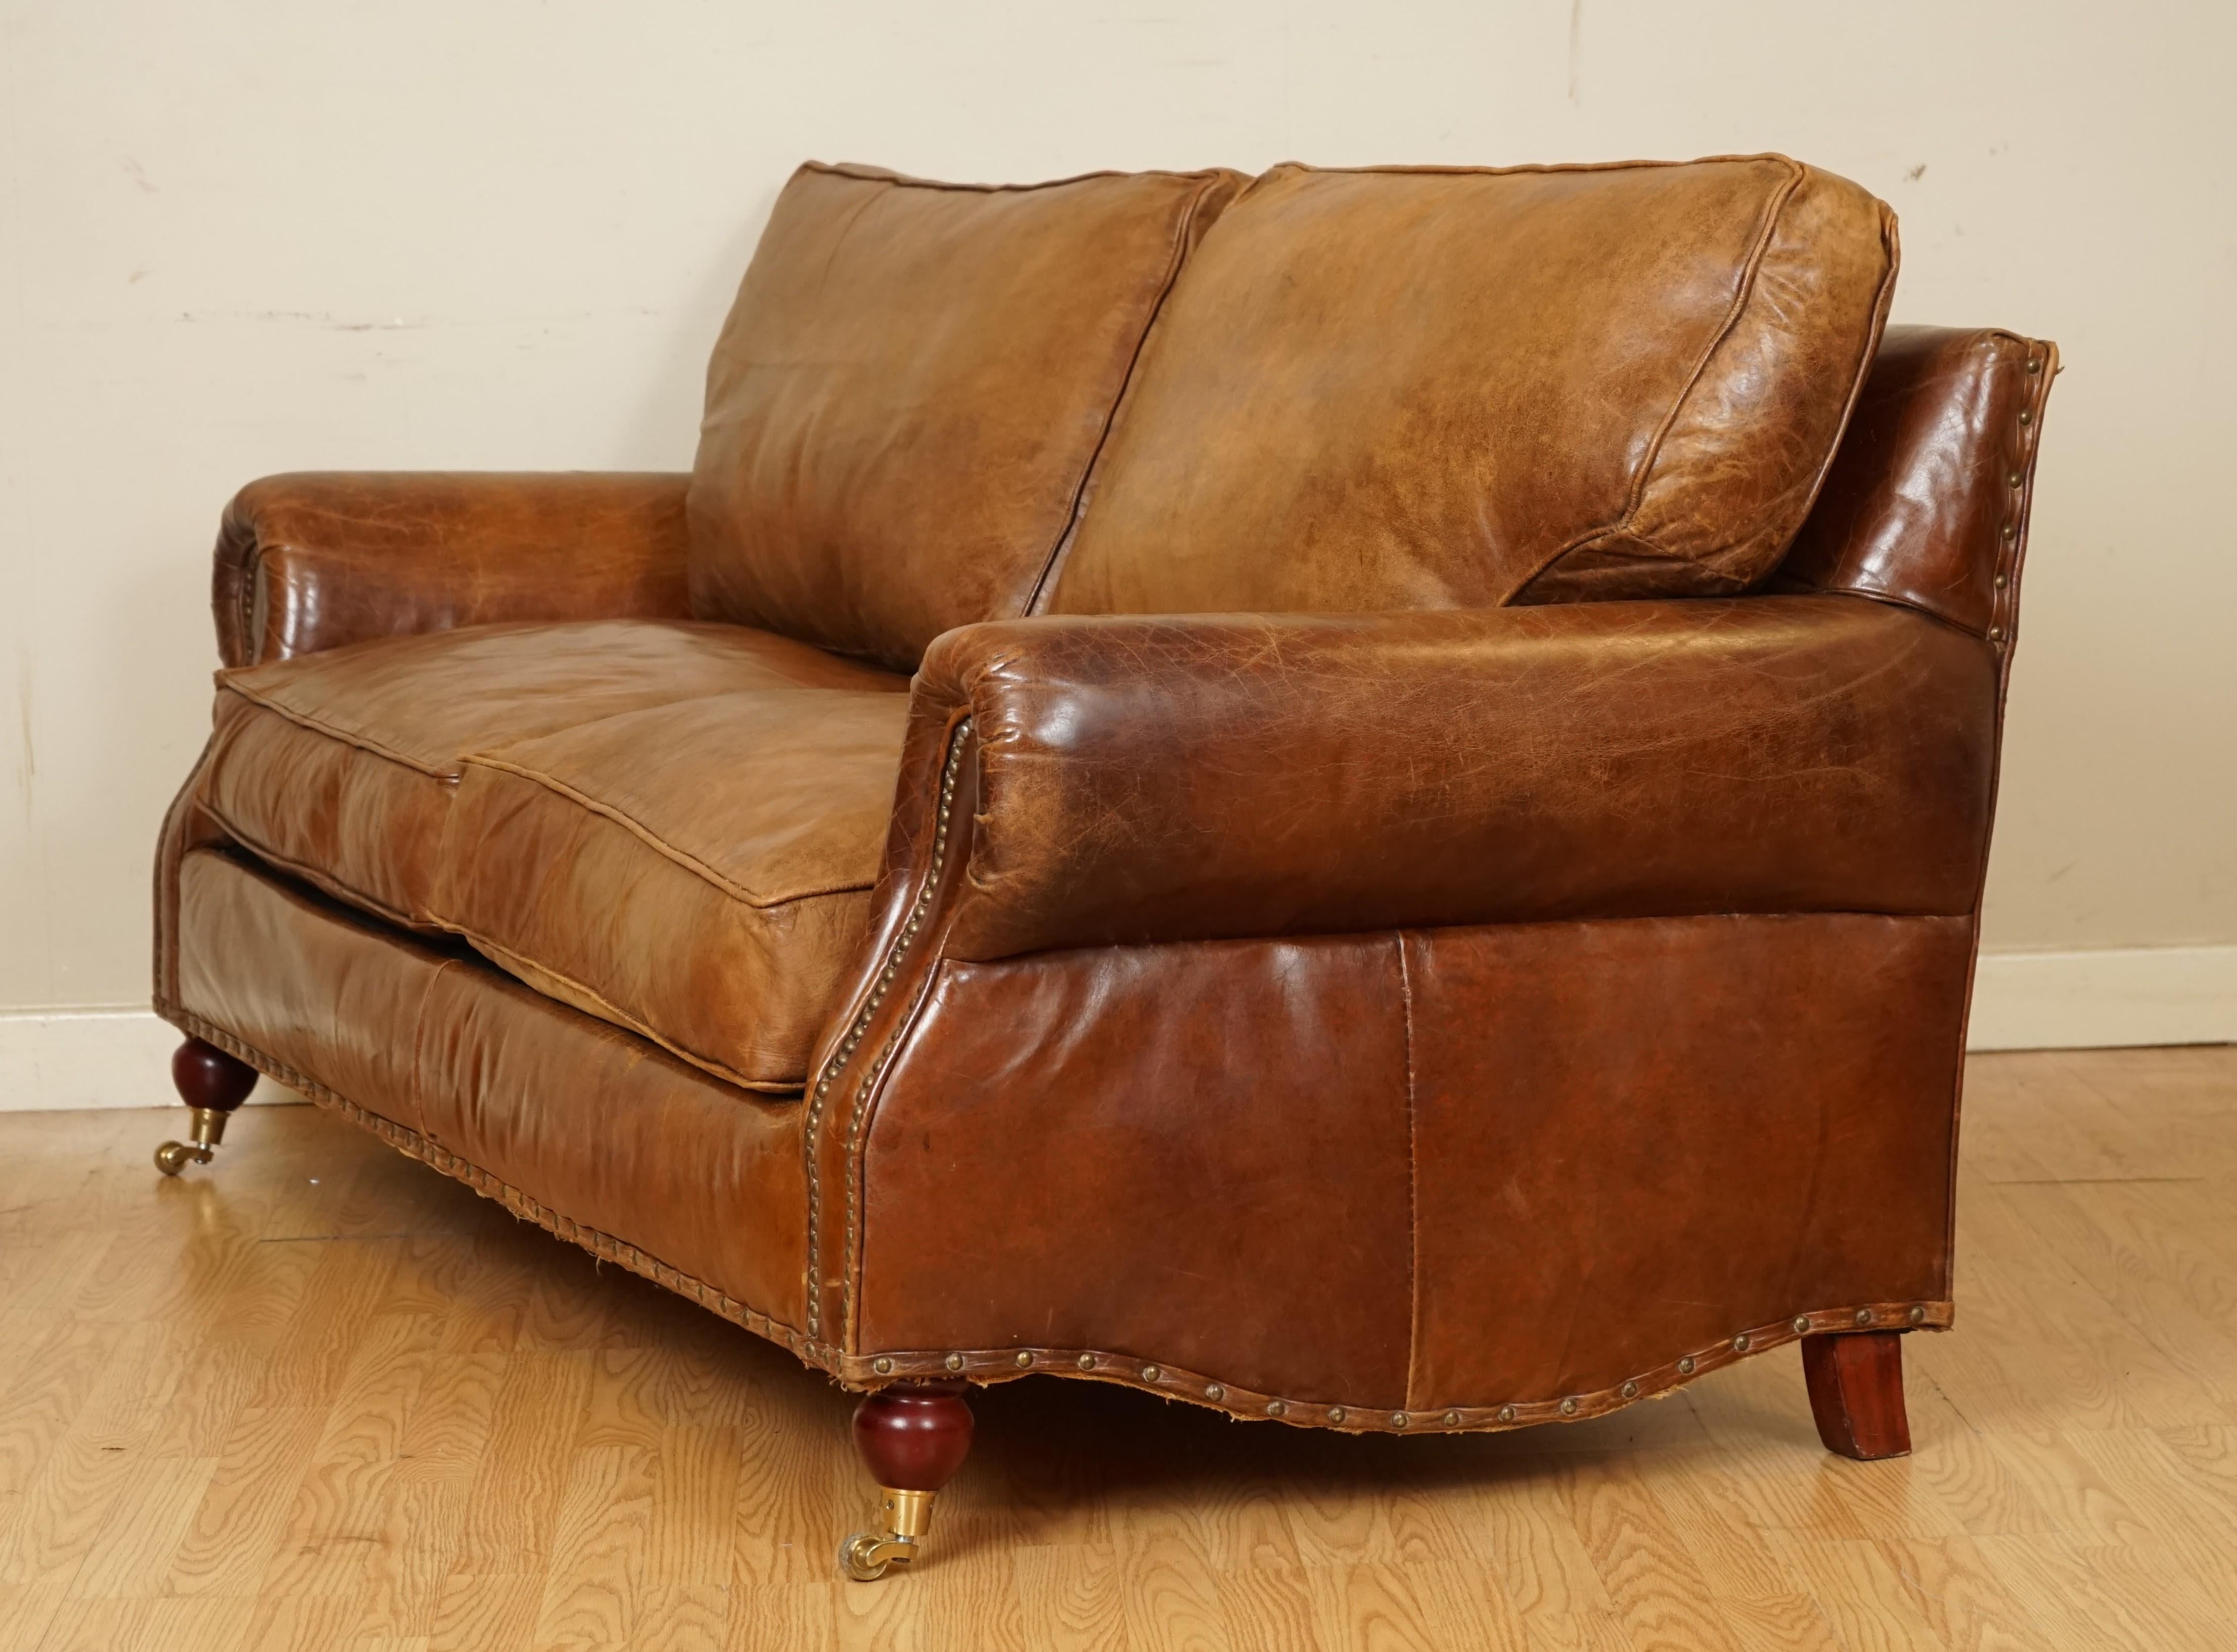 Feather Filled Halo Timothy Oulton Balmoral 3 Seater Heritage Brown Leather Sofa 2